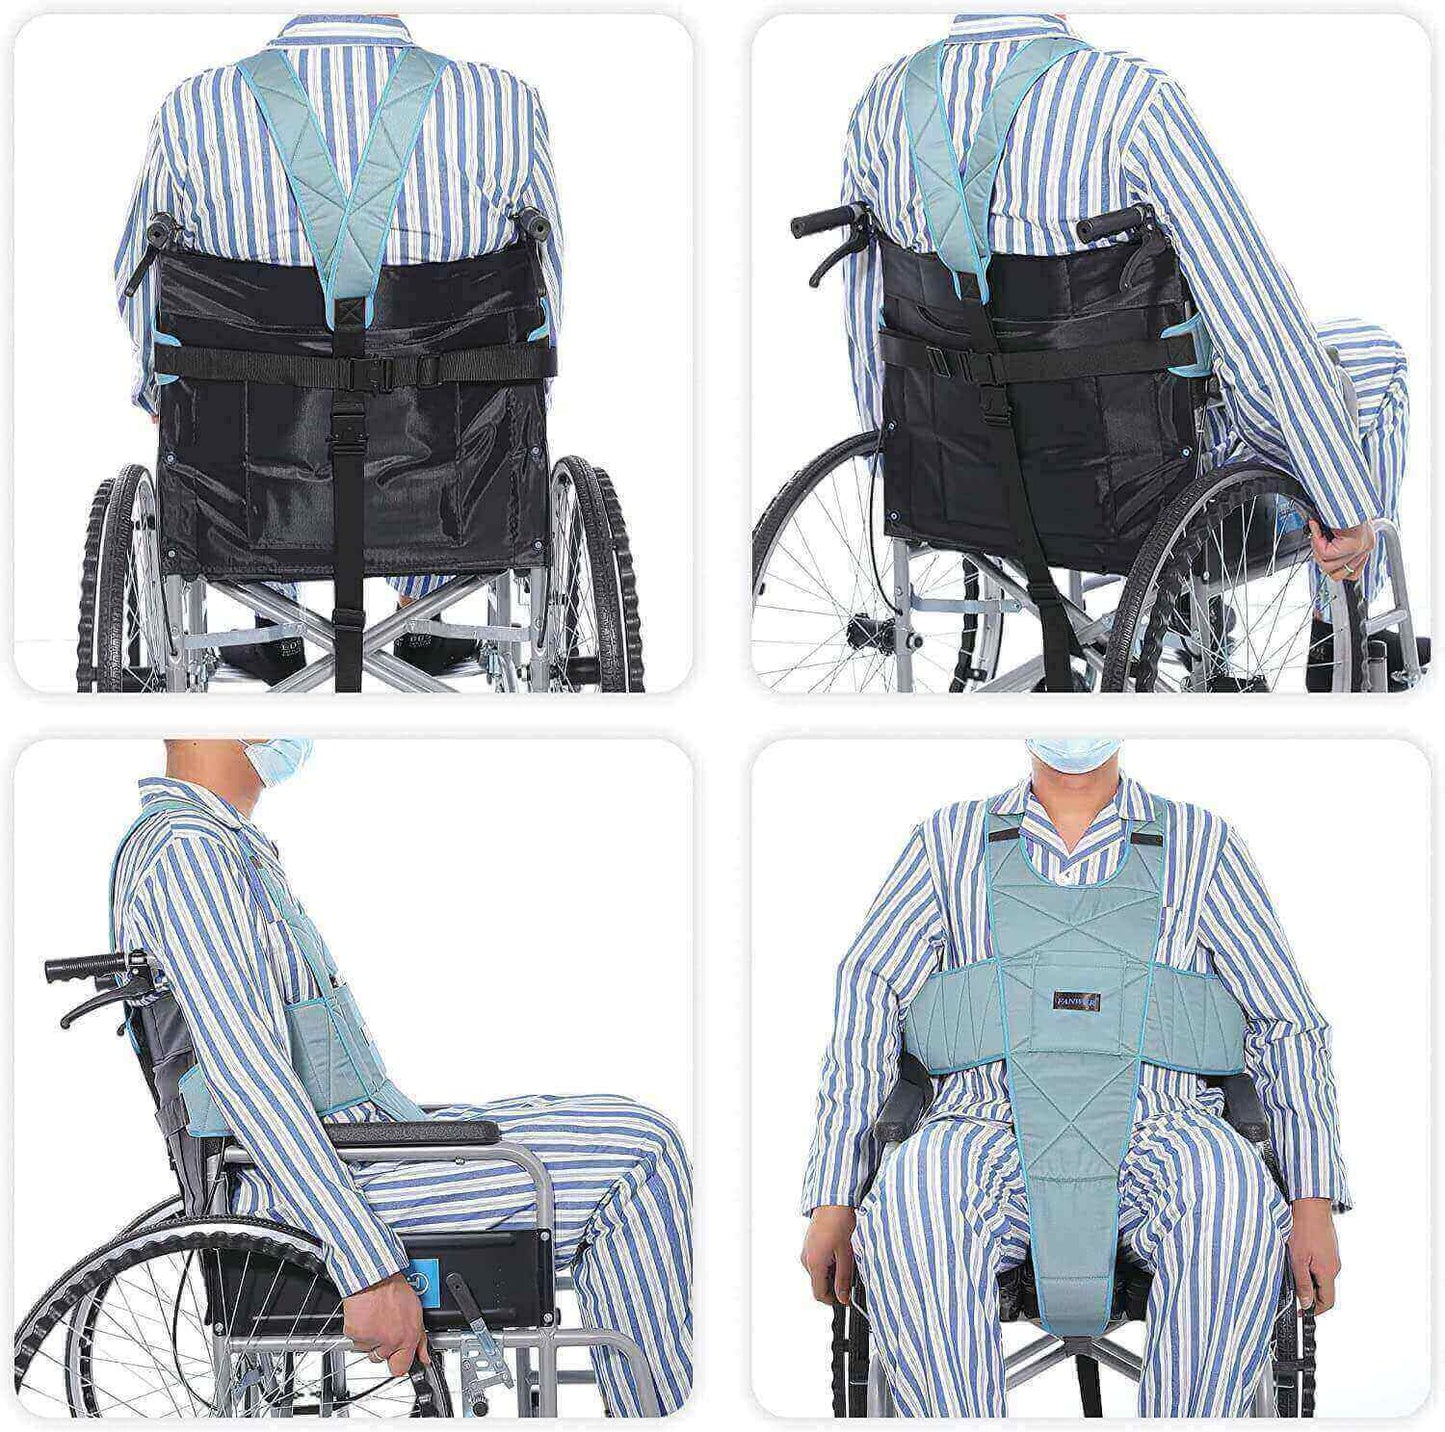 Fanwer Wheelchair Harness for Transfer Aids, various sitting gestures